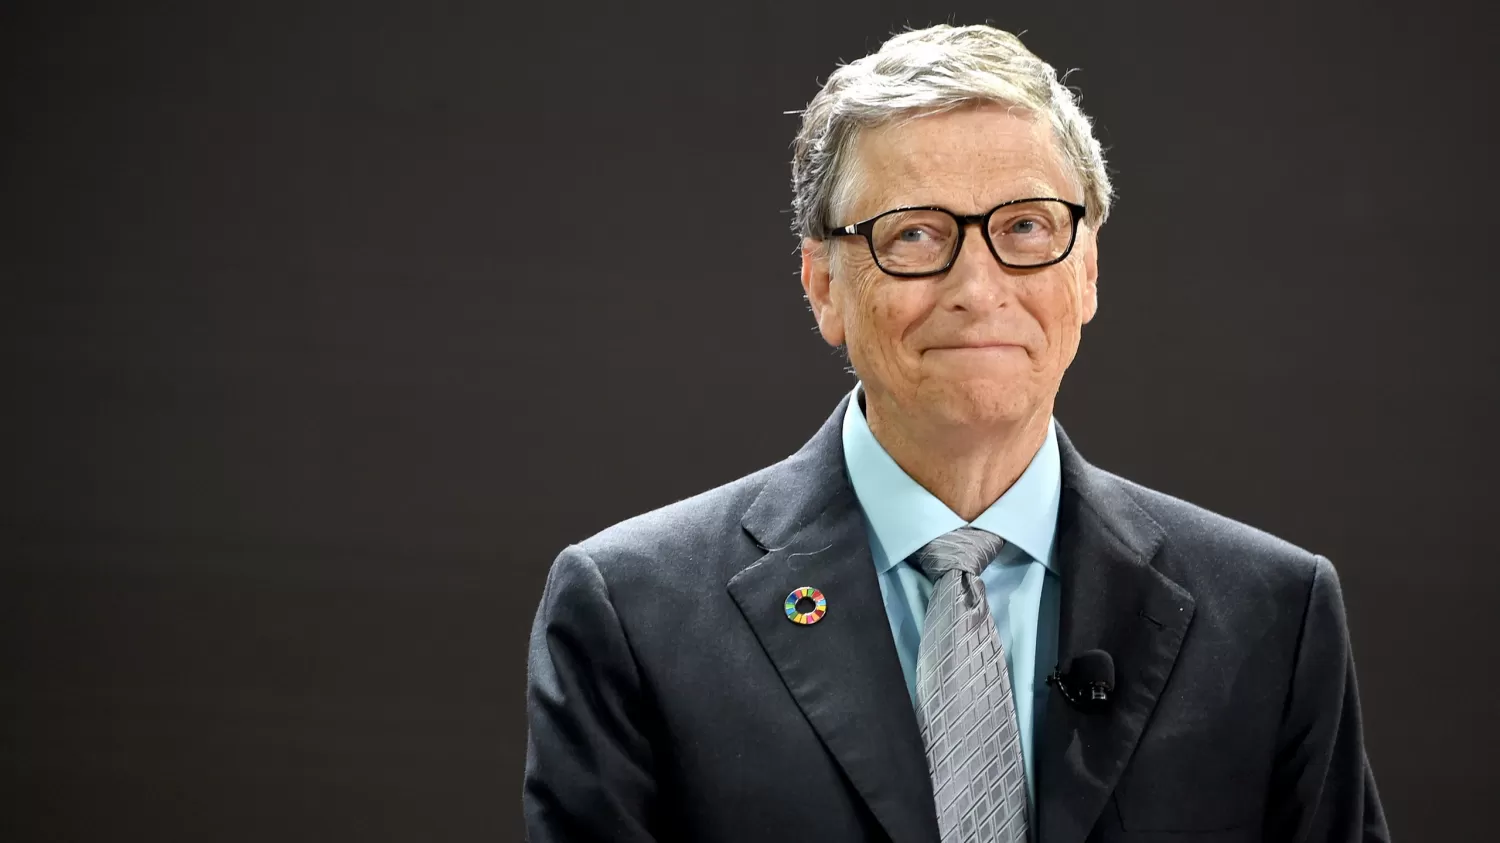 Bill Gates. Getty Images